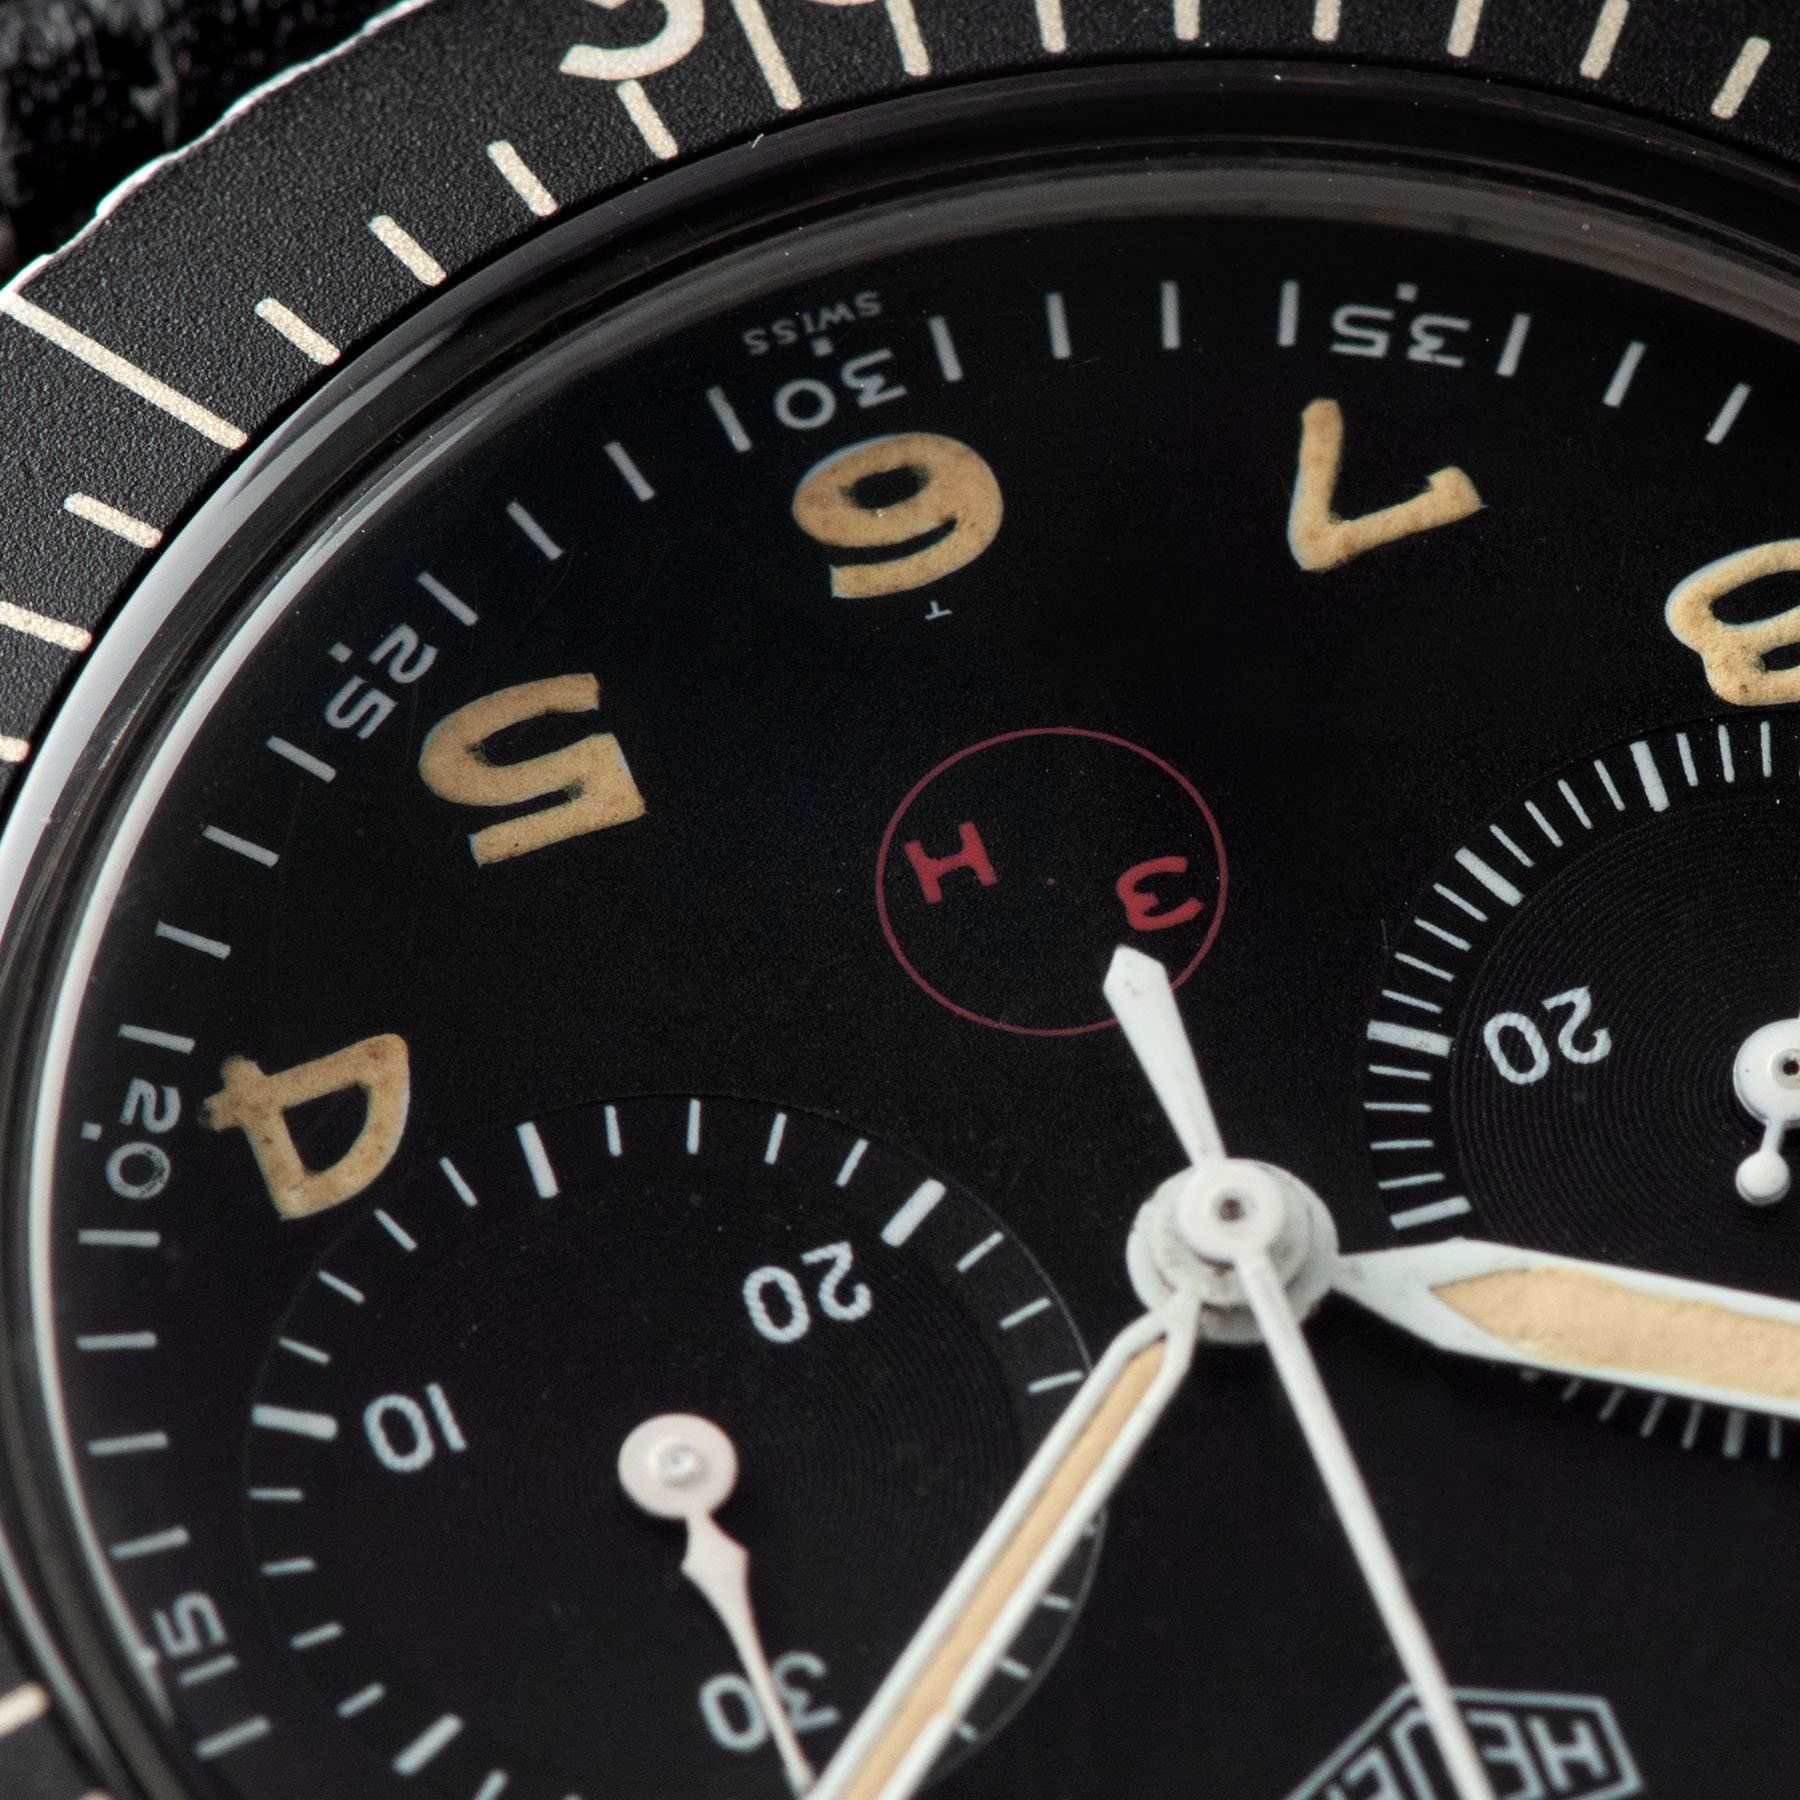 Heuer Chronograph German Issued Flyback Chrono 1550SG with Tritium (3H) bold arabic hour markers